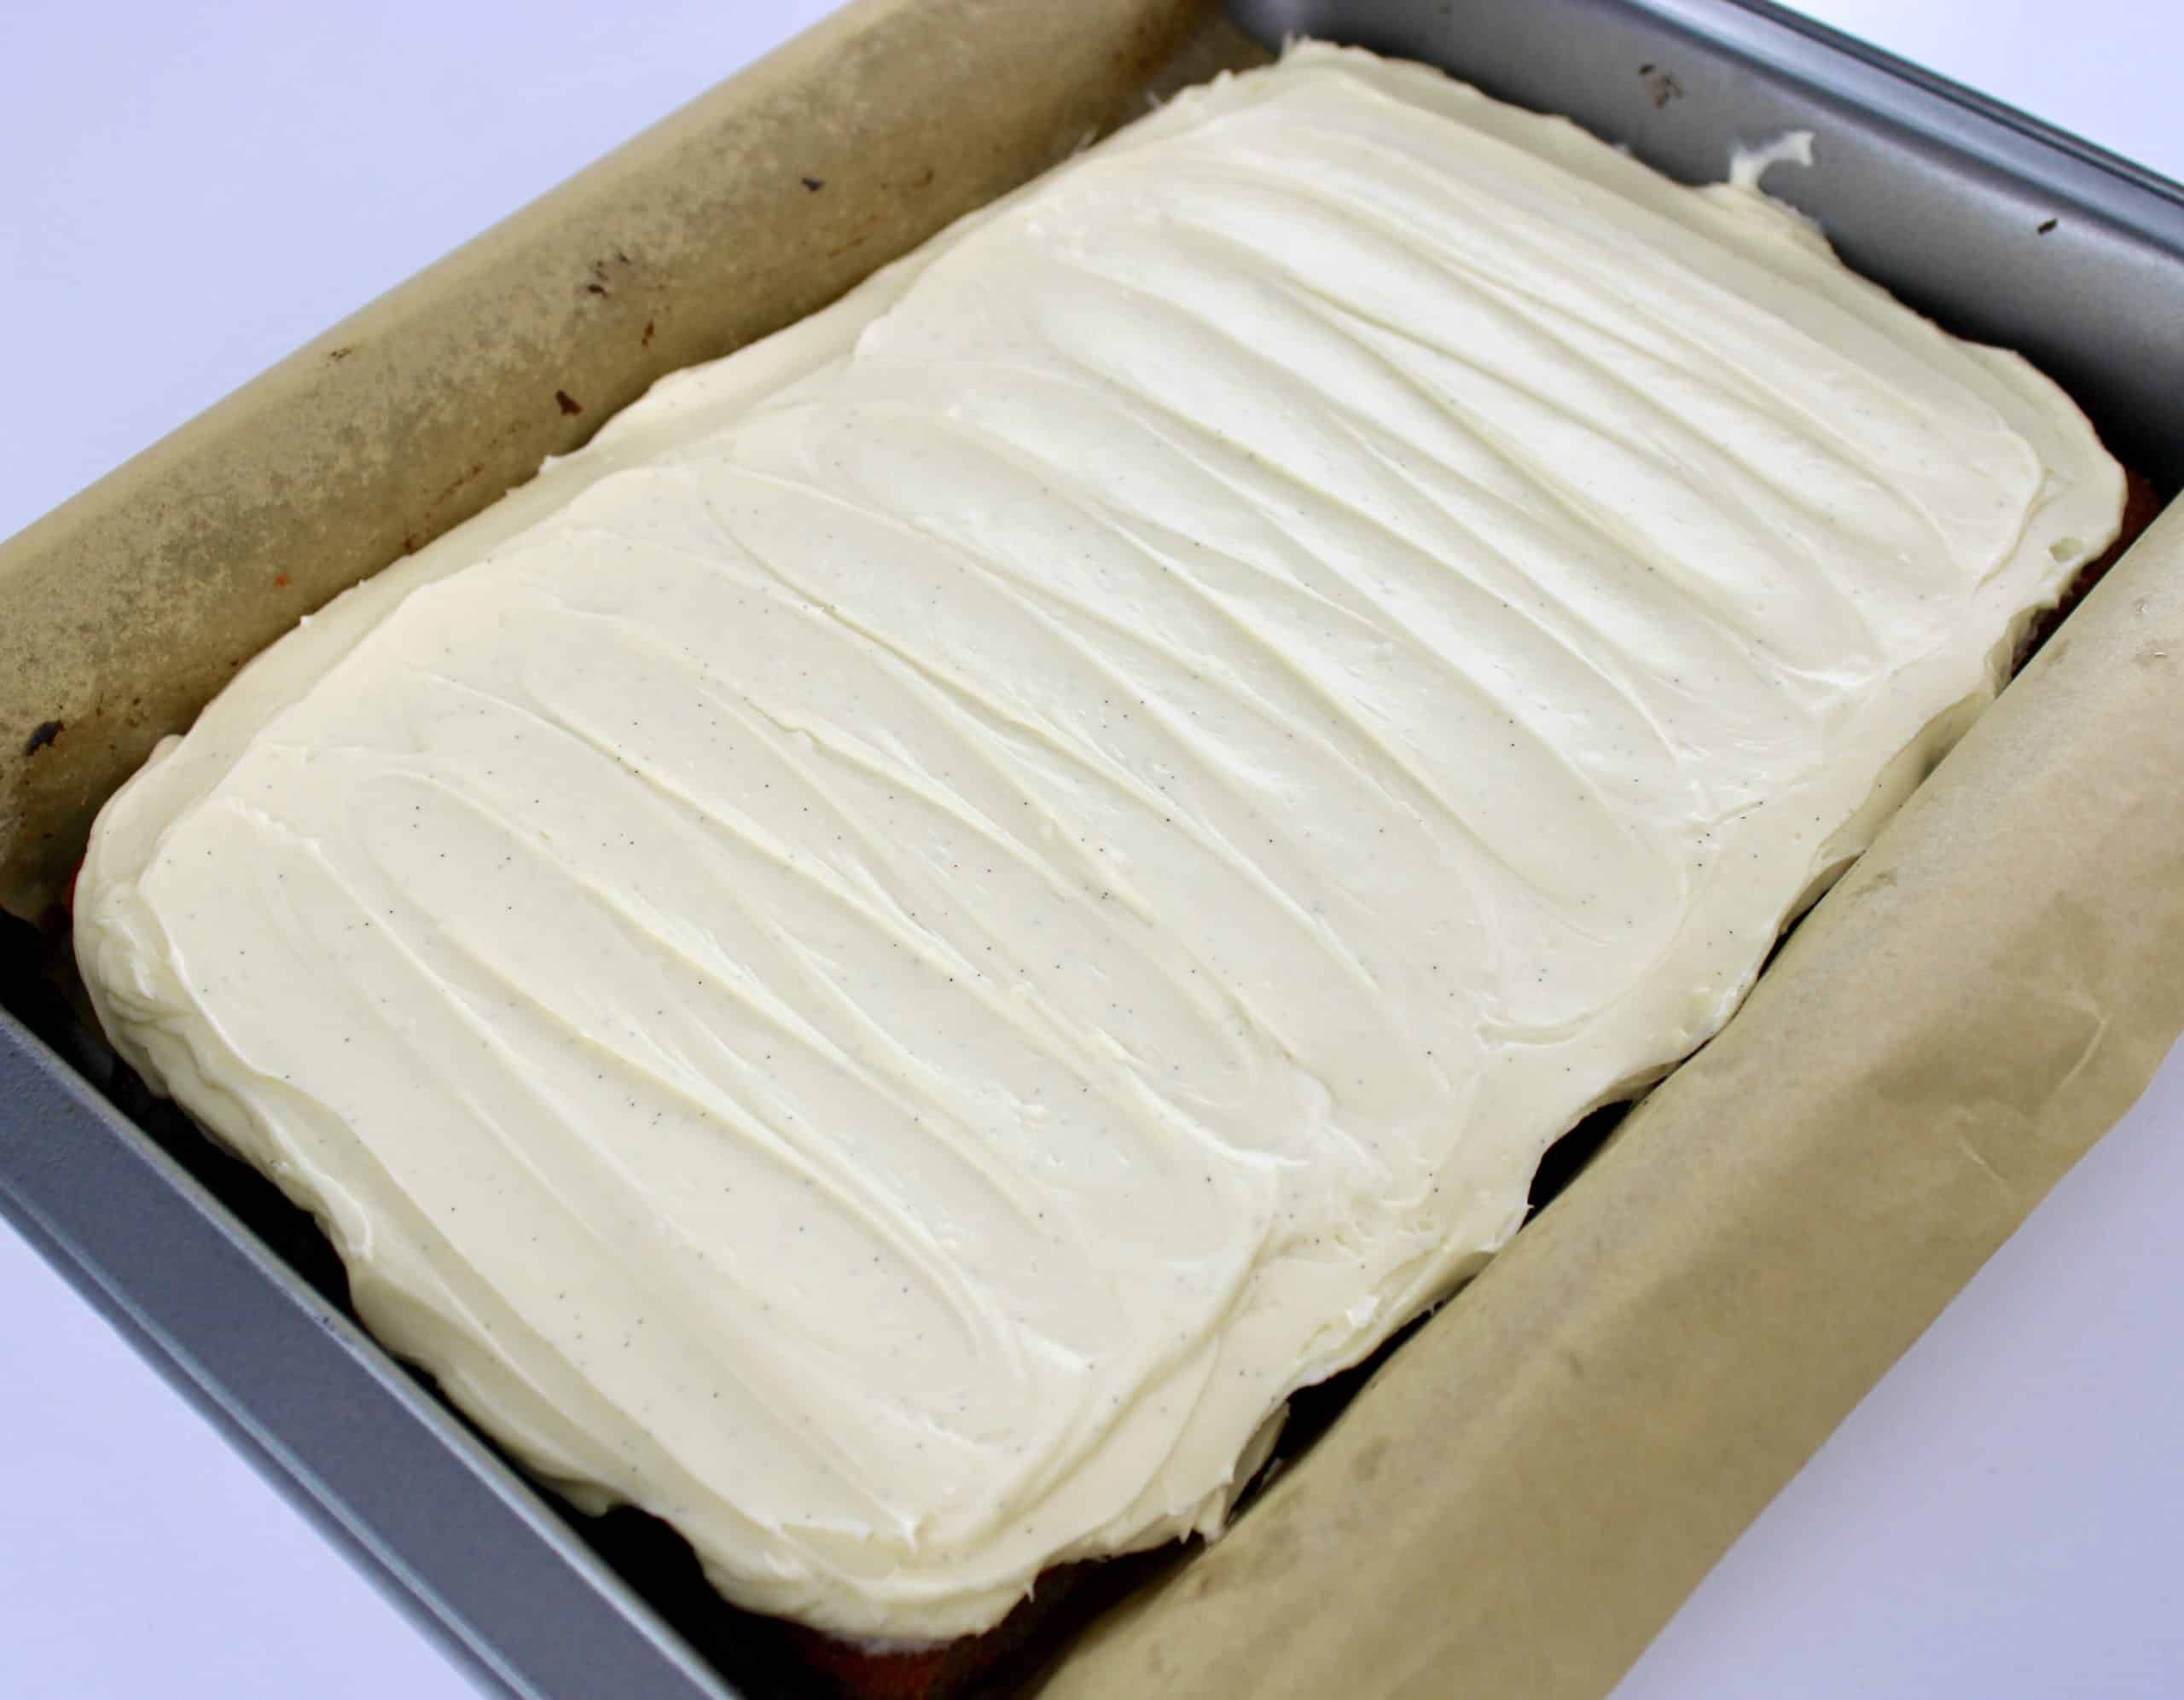 Keto Carrot Cake Bars in baking pan with parchment paper with vanilla frosting on top